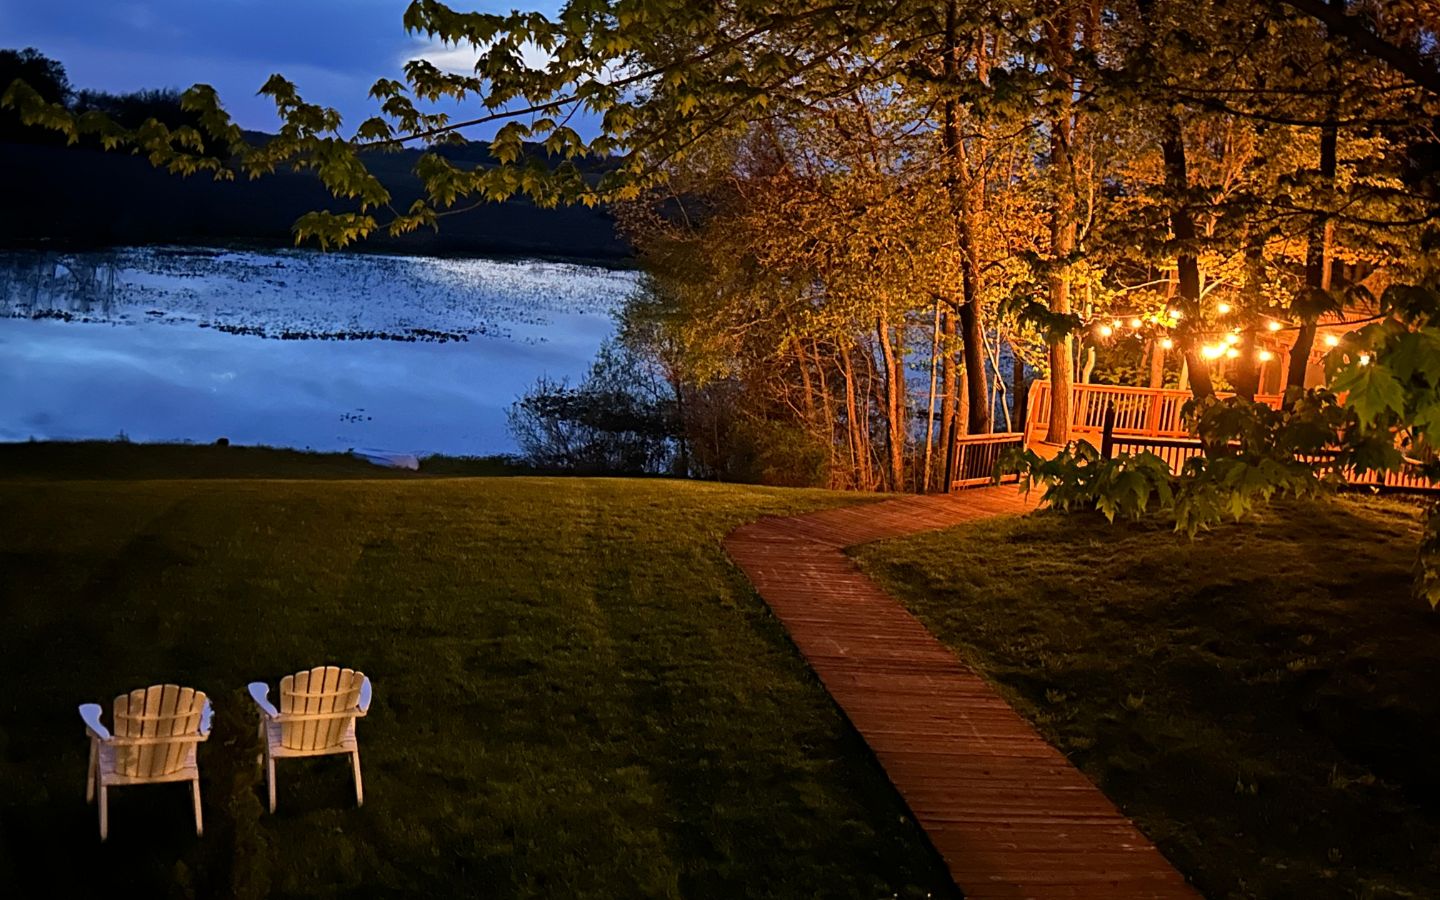 Adirondack chairs and a lighted gazebo next to the pond